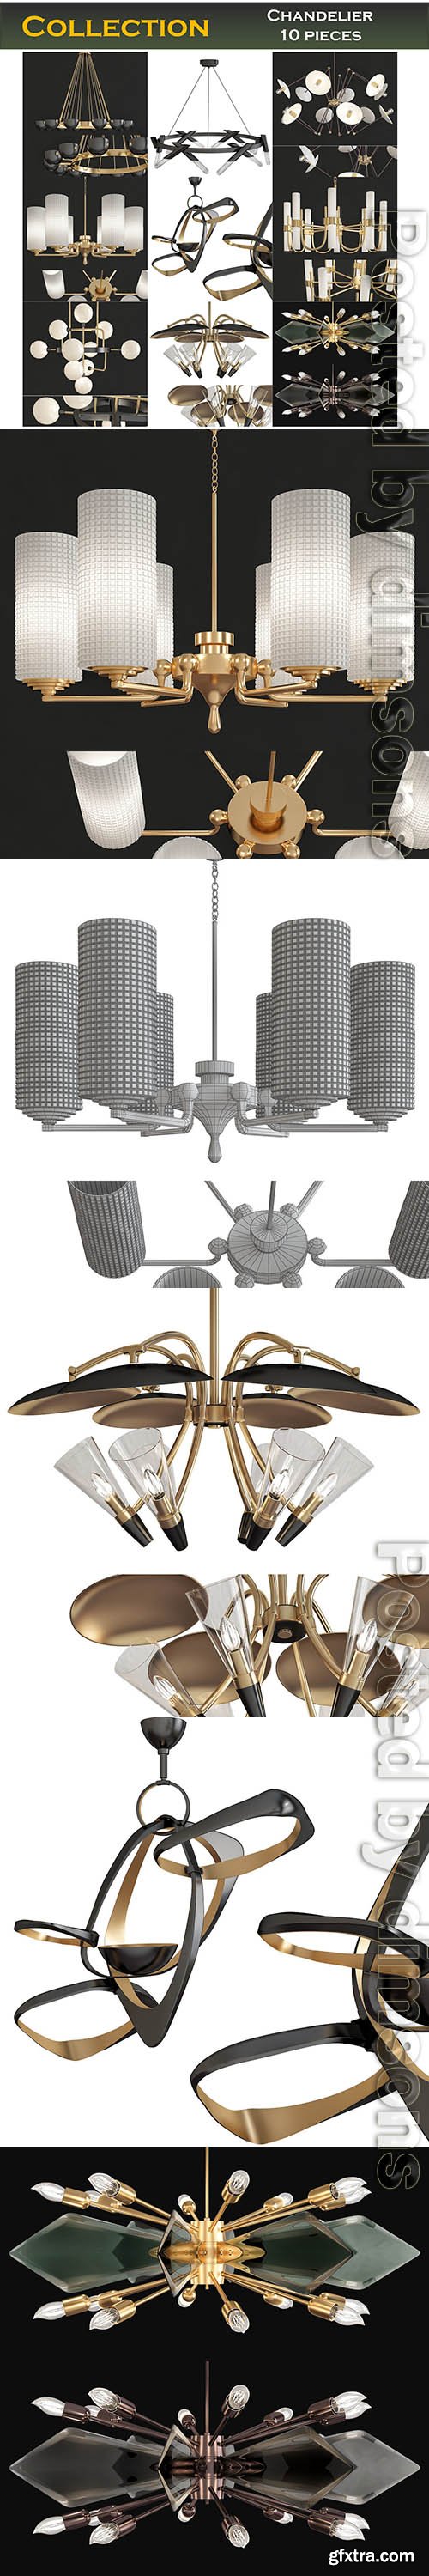 Cgtrader - Chandeliers 3d models Collection 10 models Low-poly 3D model